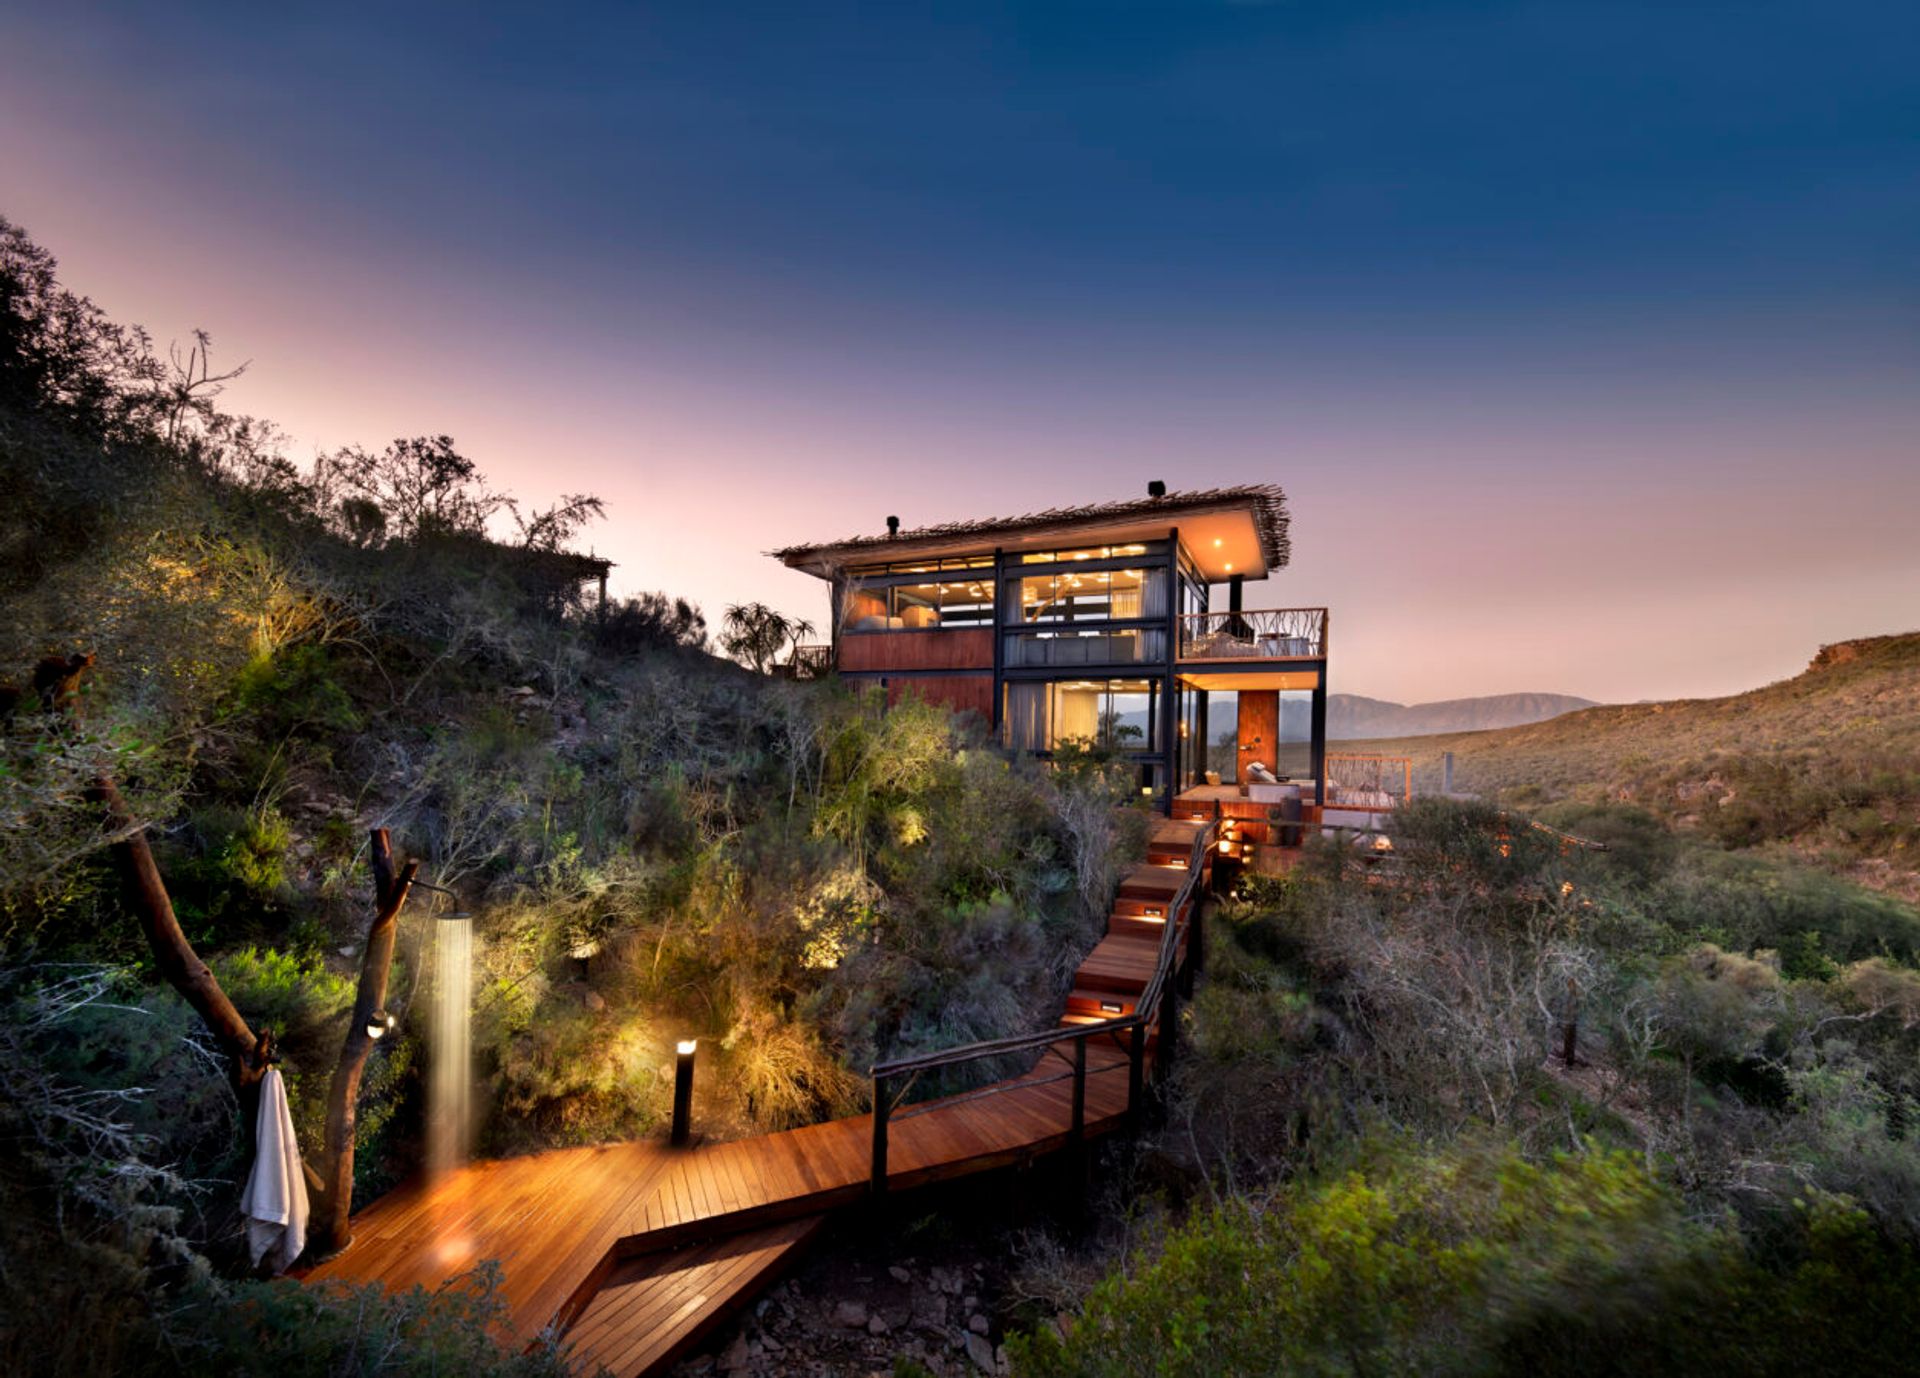 Melozhori Game Reserve Treehouse